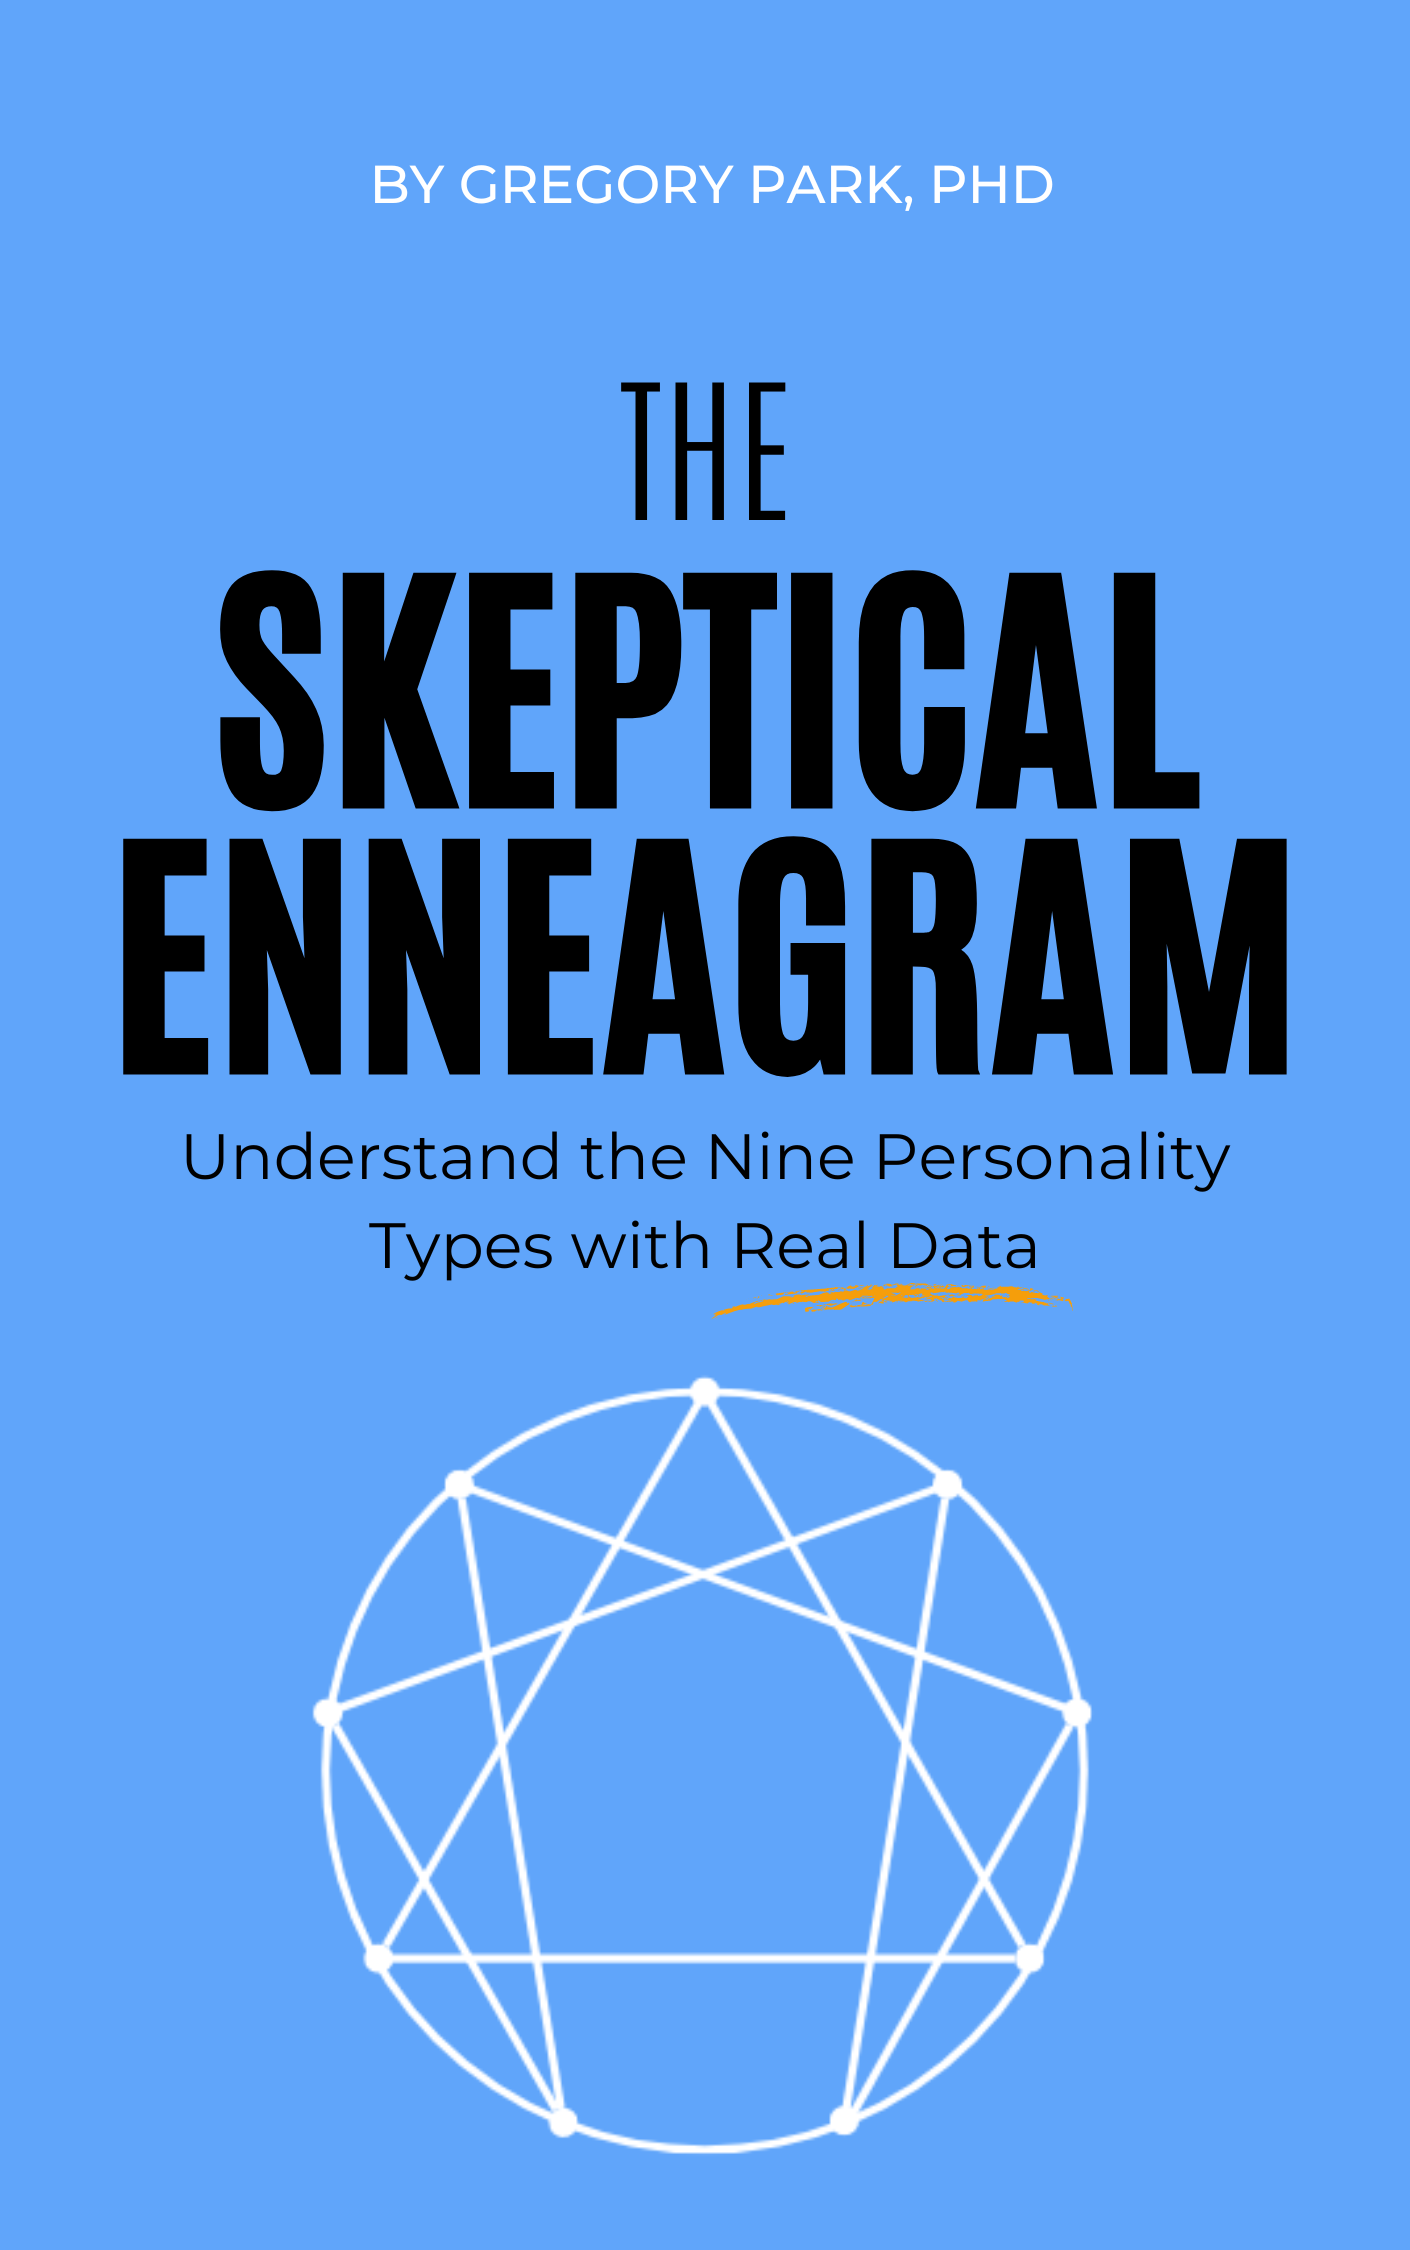 The working book cover of The Skeptical Enneagram.